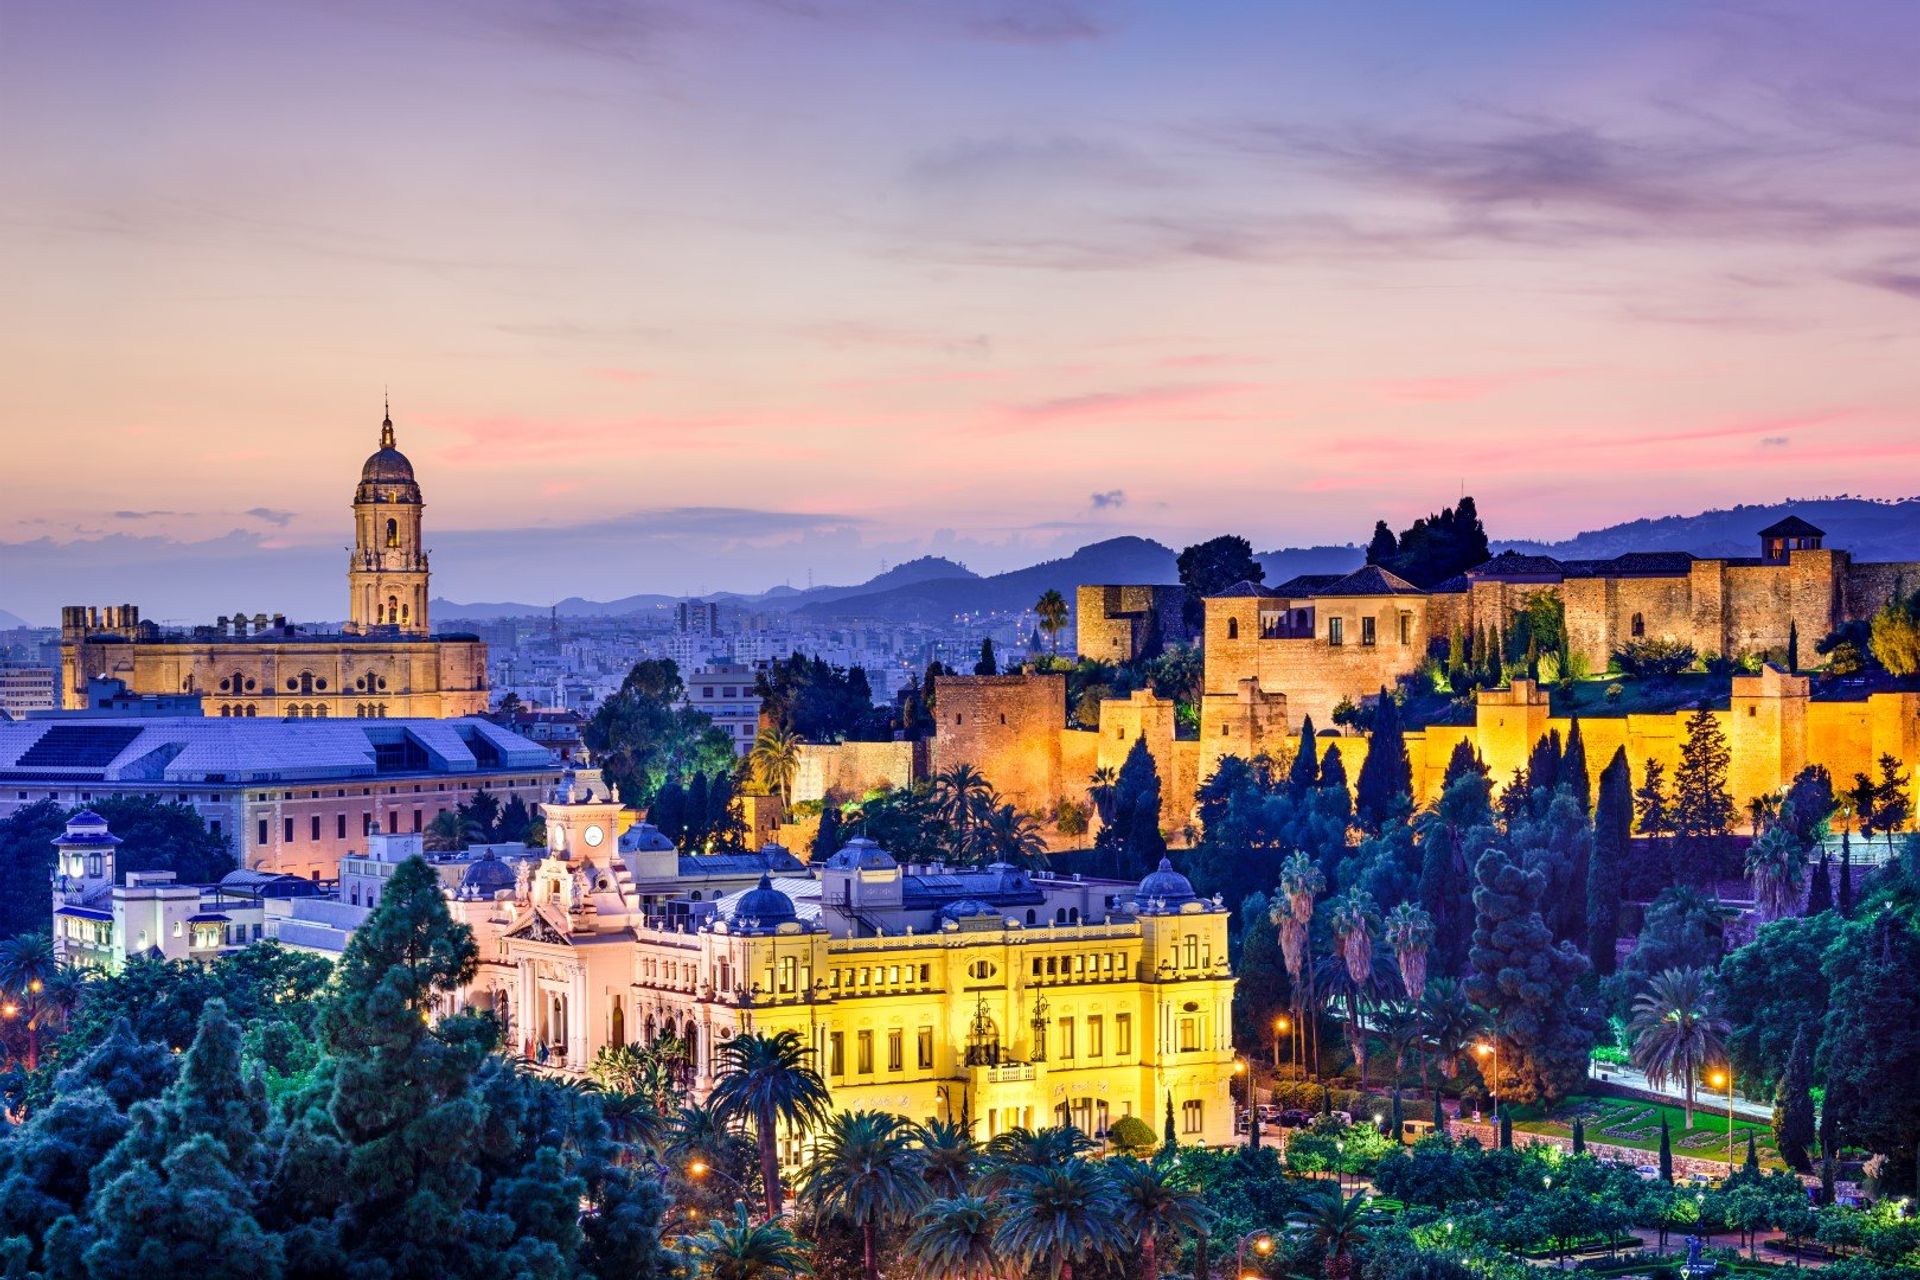 Malaga metropolis, one of the most popular rivieras in Andalucia, at sundown